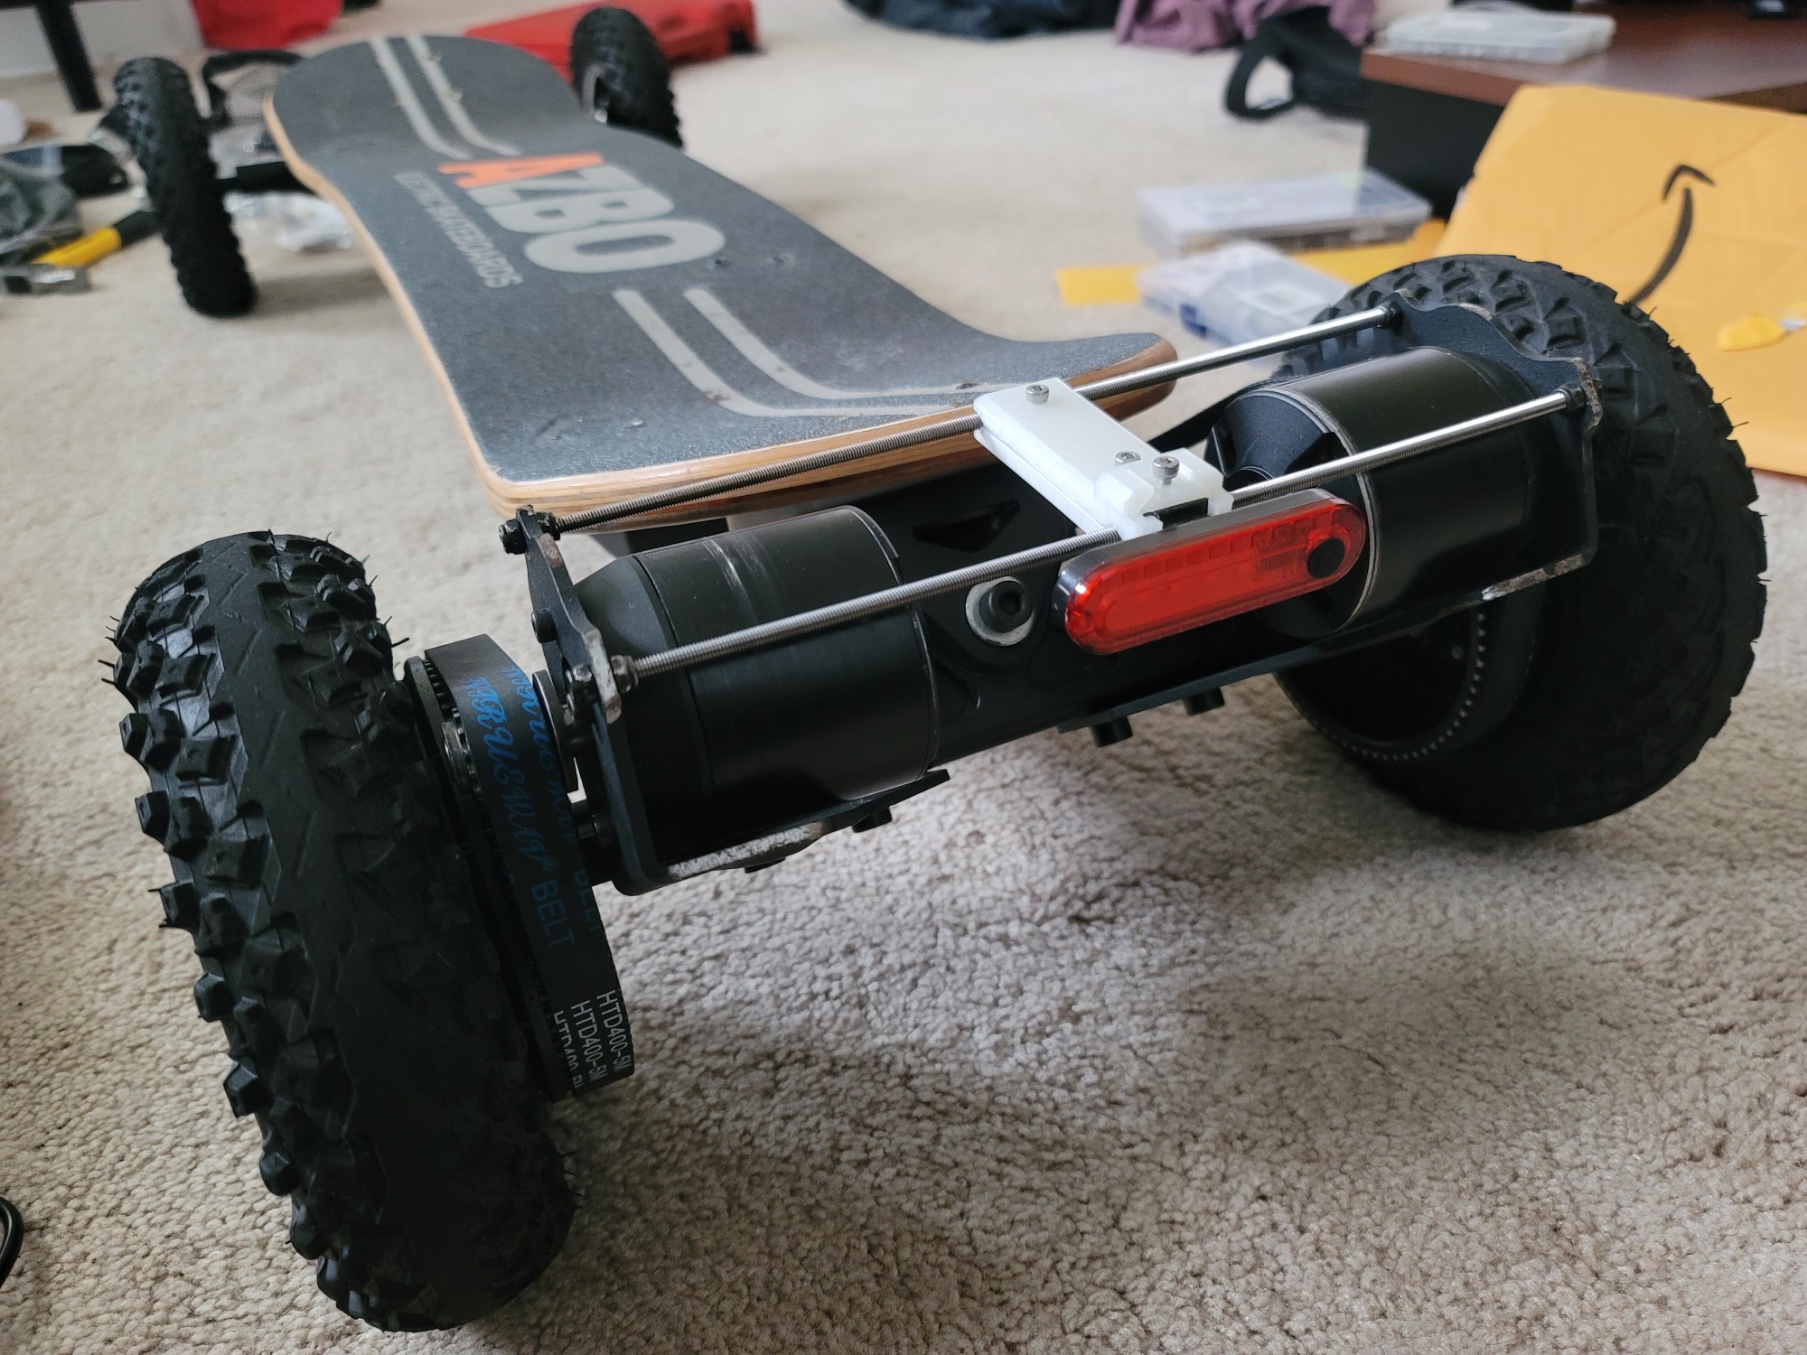 Electric Skateboard Tail Light Mount by Mobius-1 | Download free STL ...